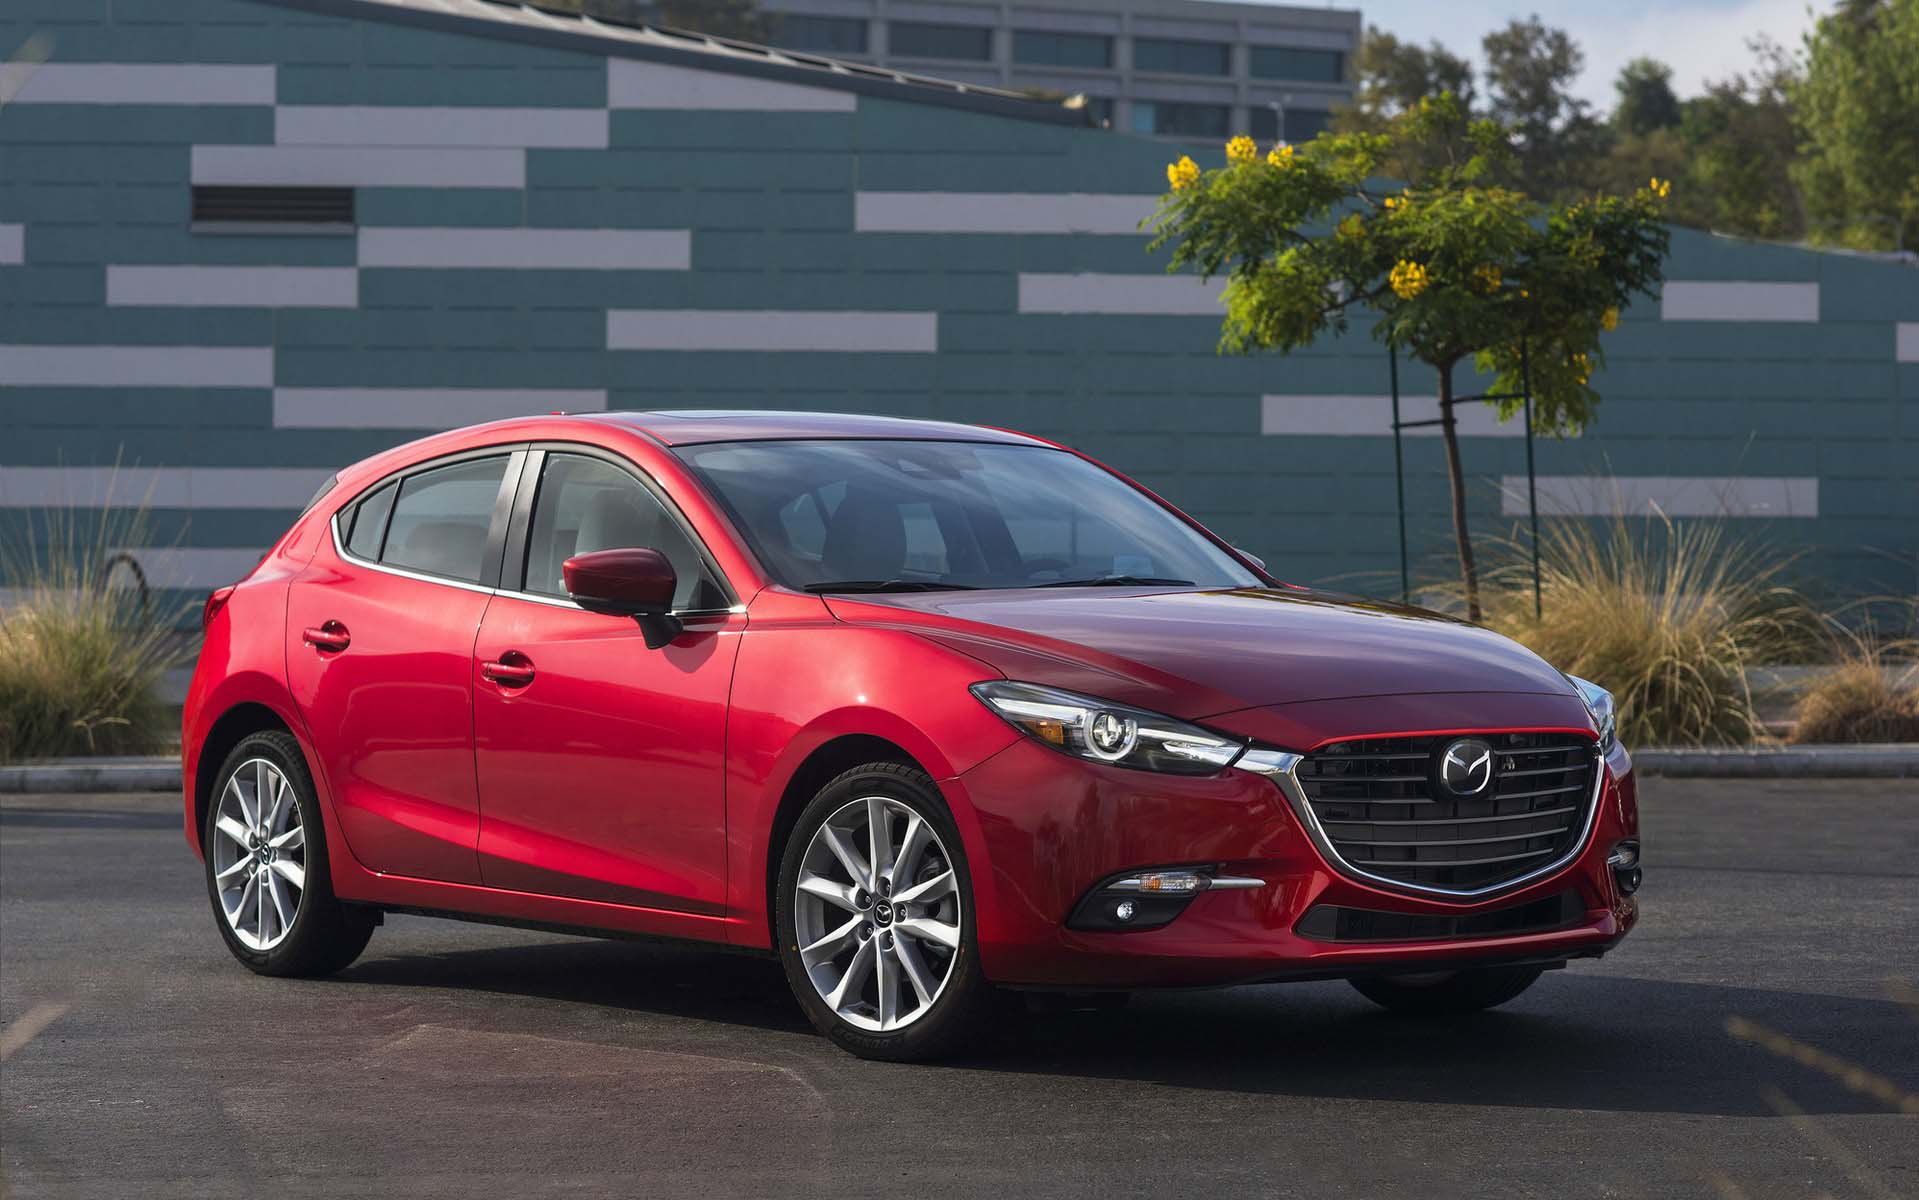 2017 Mazda3 - KBB.com 10 Coolest Cars: The Mazda3 is widely regarded as the best-looking and most fun-to-drive vehicle in the segment, and we call it one of the coolest cars of all time.